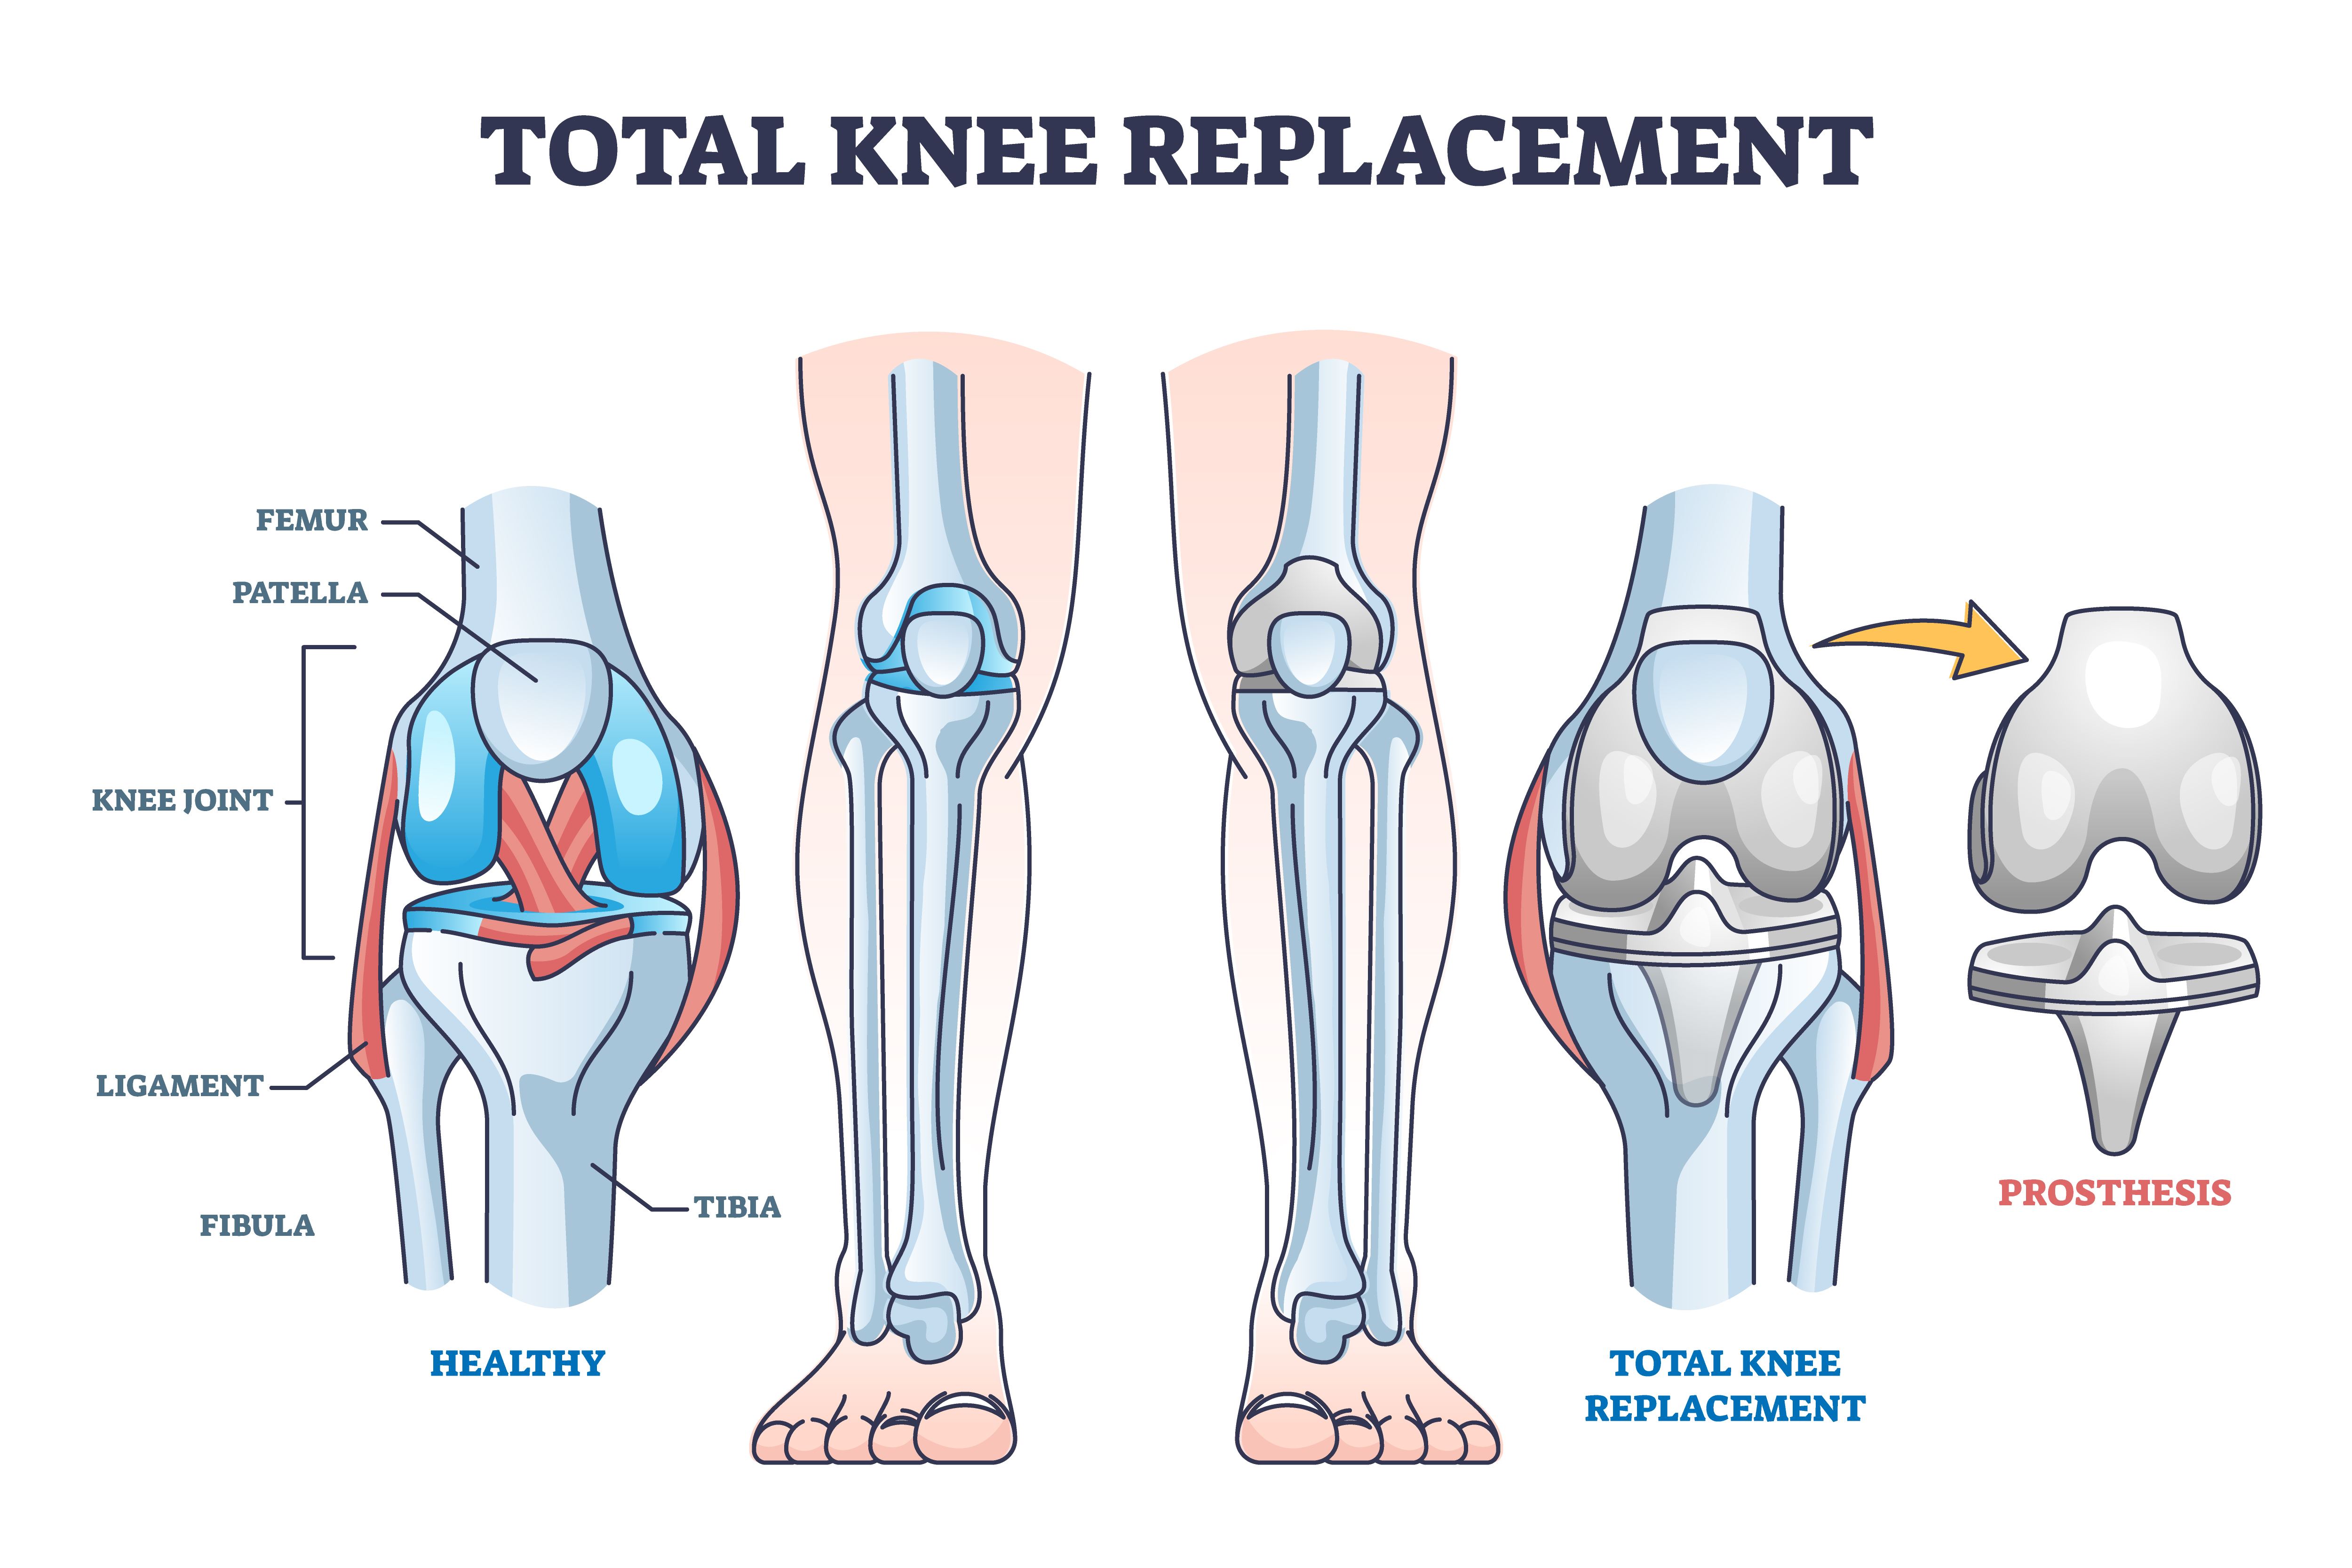 Illustration of a total knee replacement